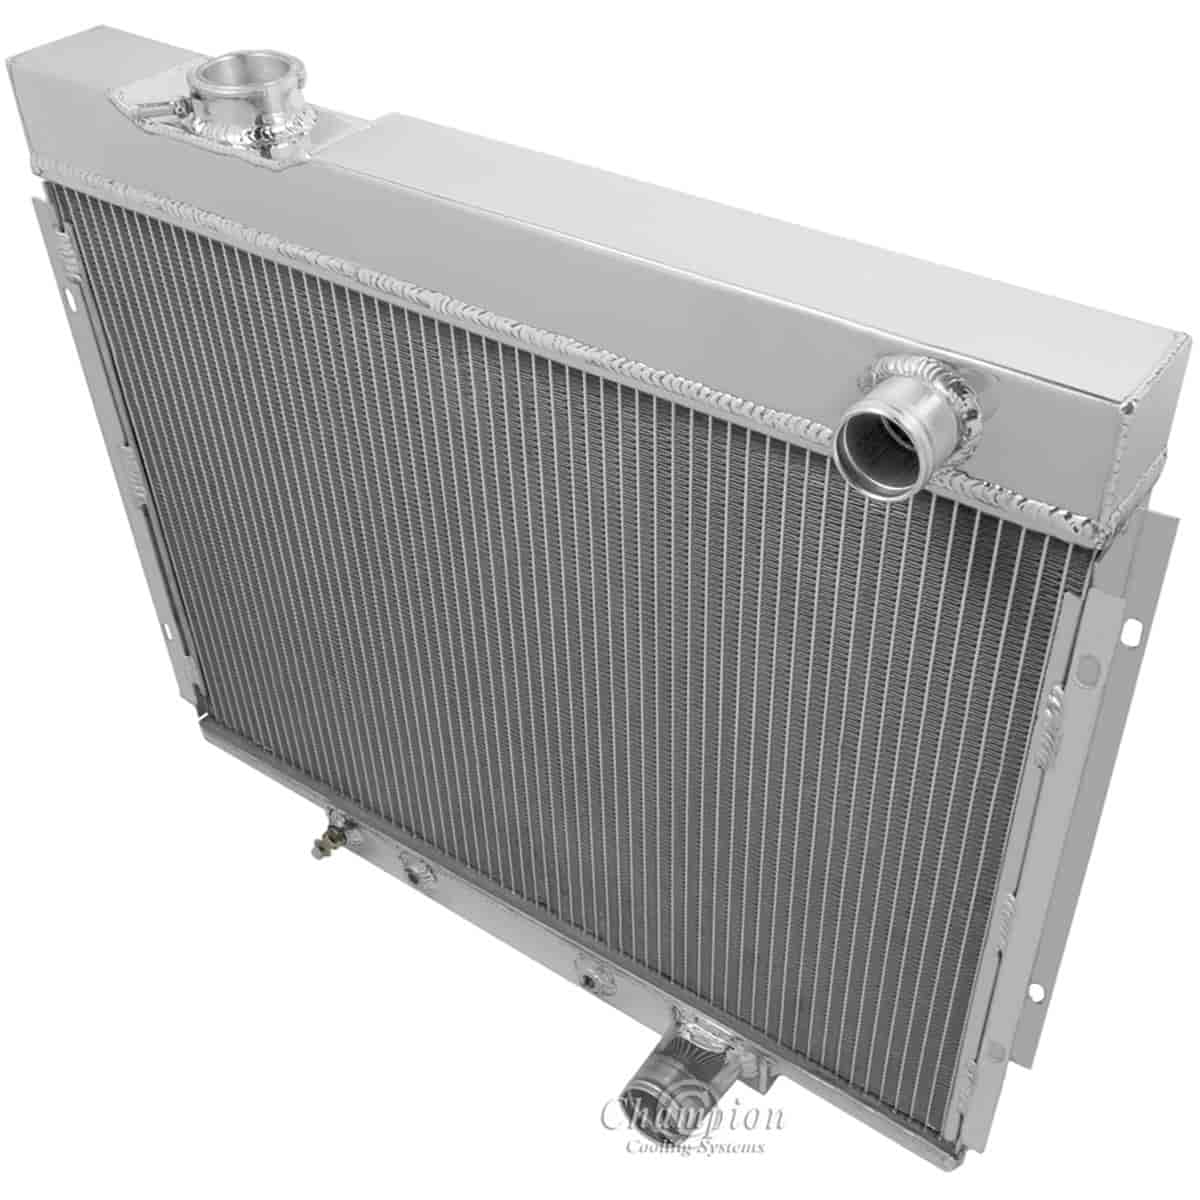 Monster Cooling-Series All-Aluminum Radiator Ford Galaxie, and Galaxie 500